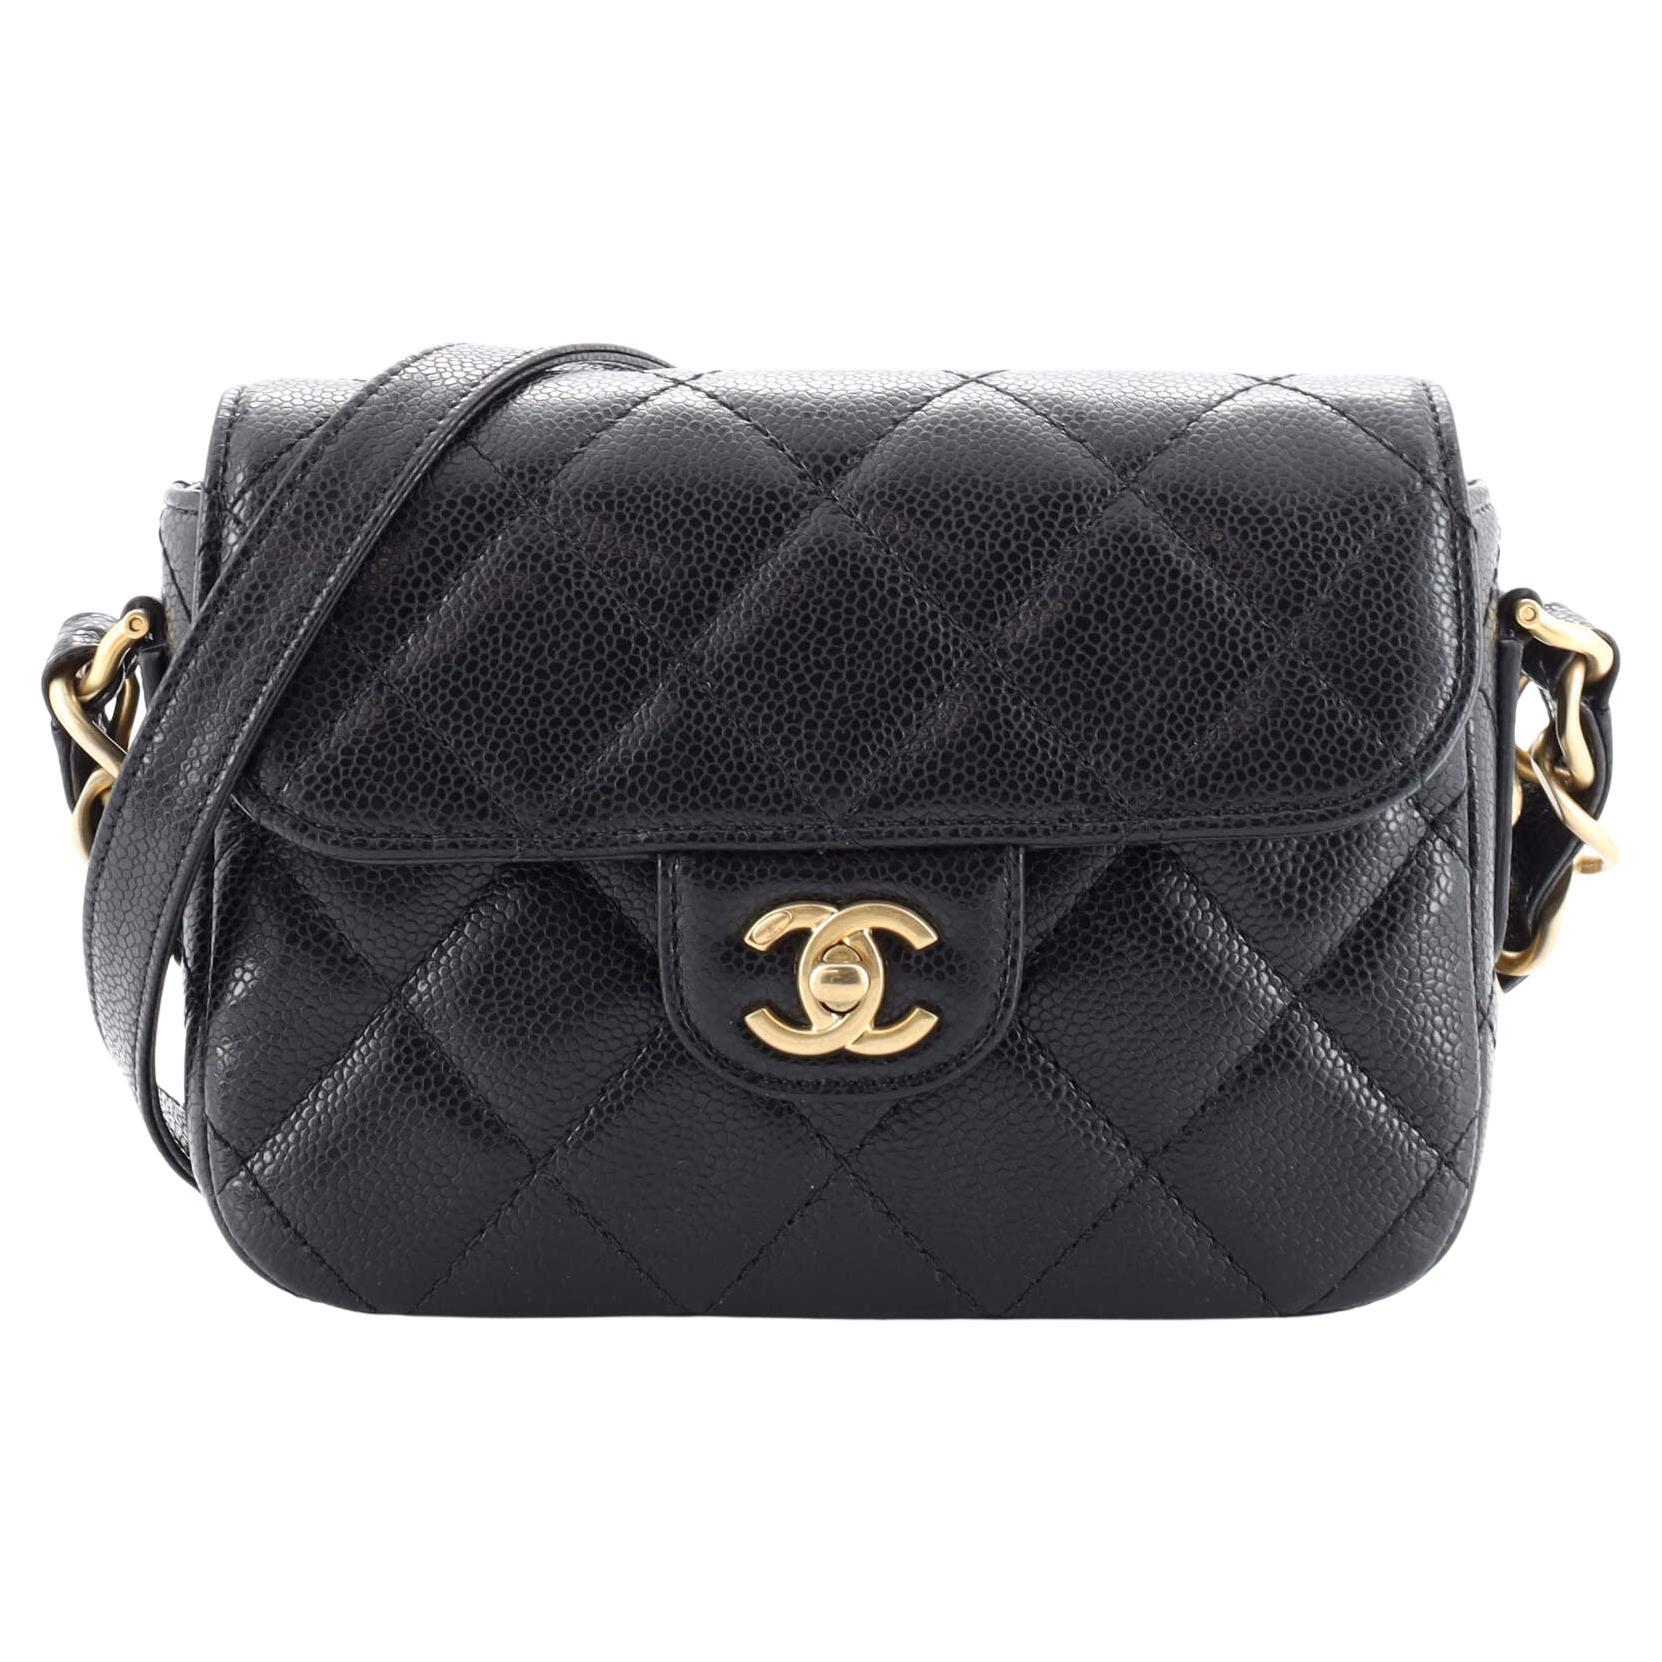 Charles & Keith - Women's Cressida Quilted Chain Strap Bag, Black, M